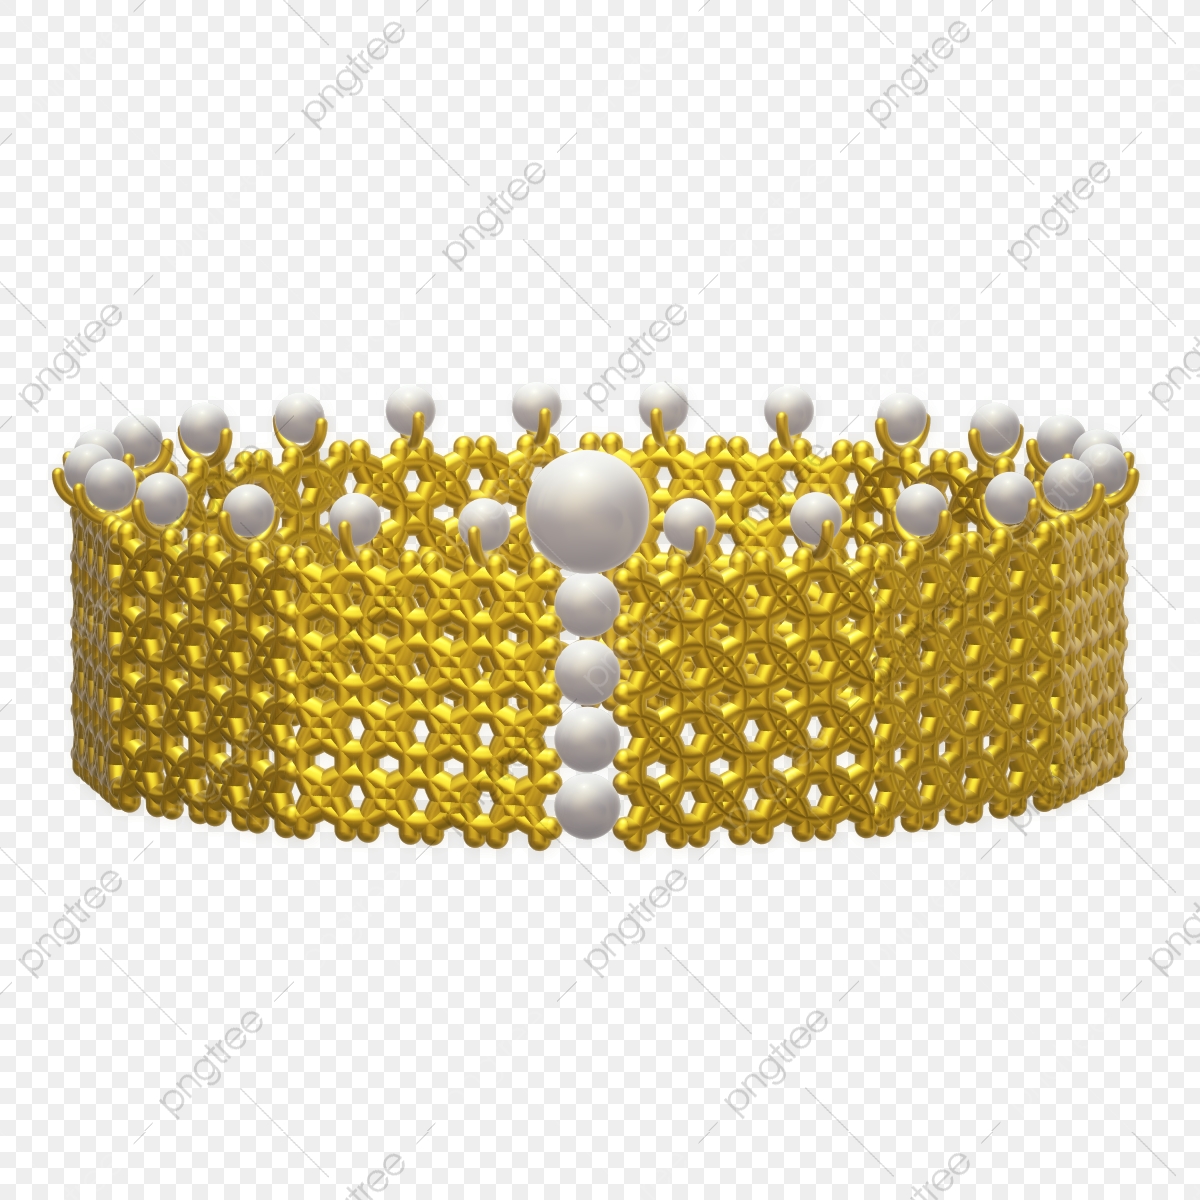 Pearl clipart golden. Gold and pearls crown